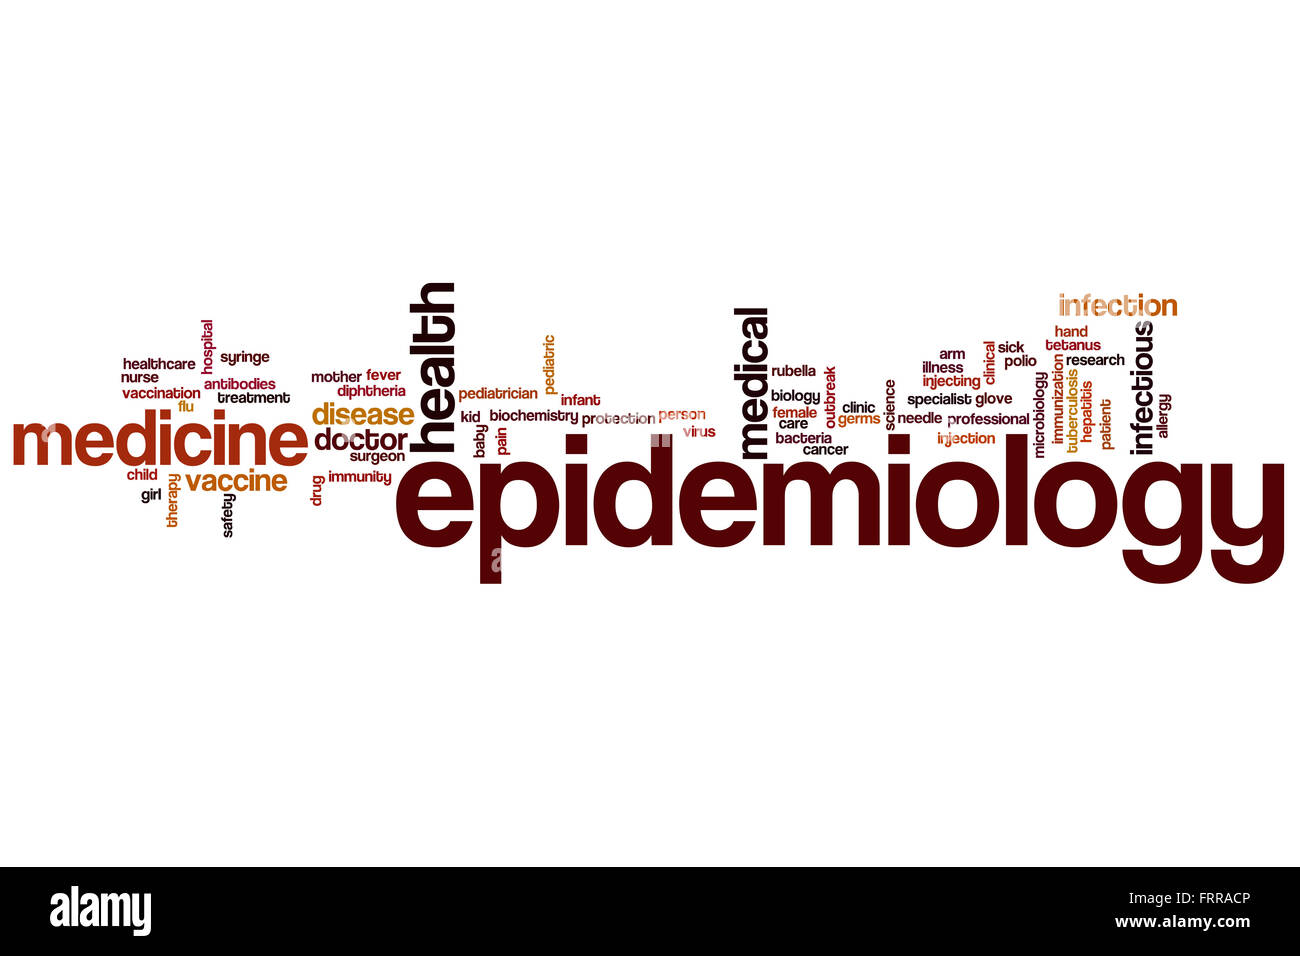 Epidemiology word cloud concept with medicine disease related tags Stock Photo